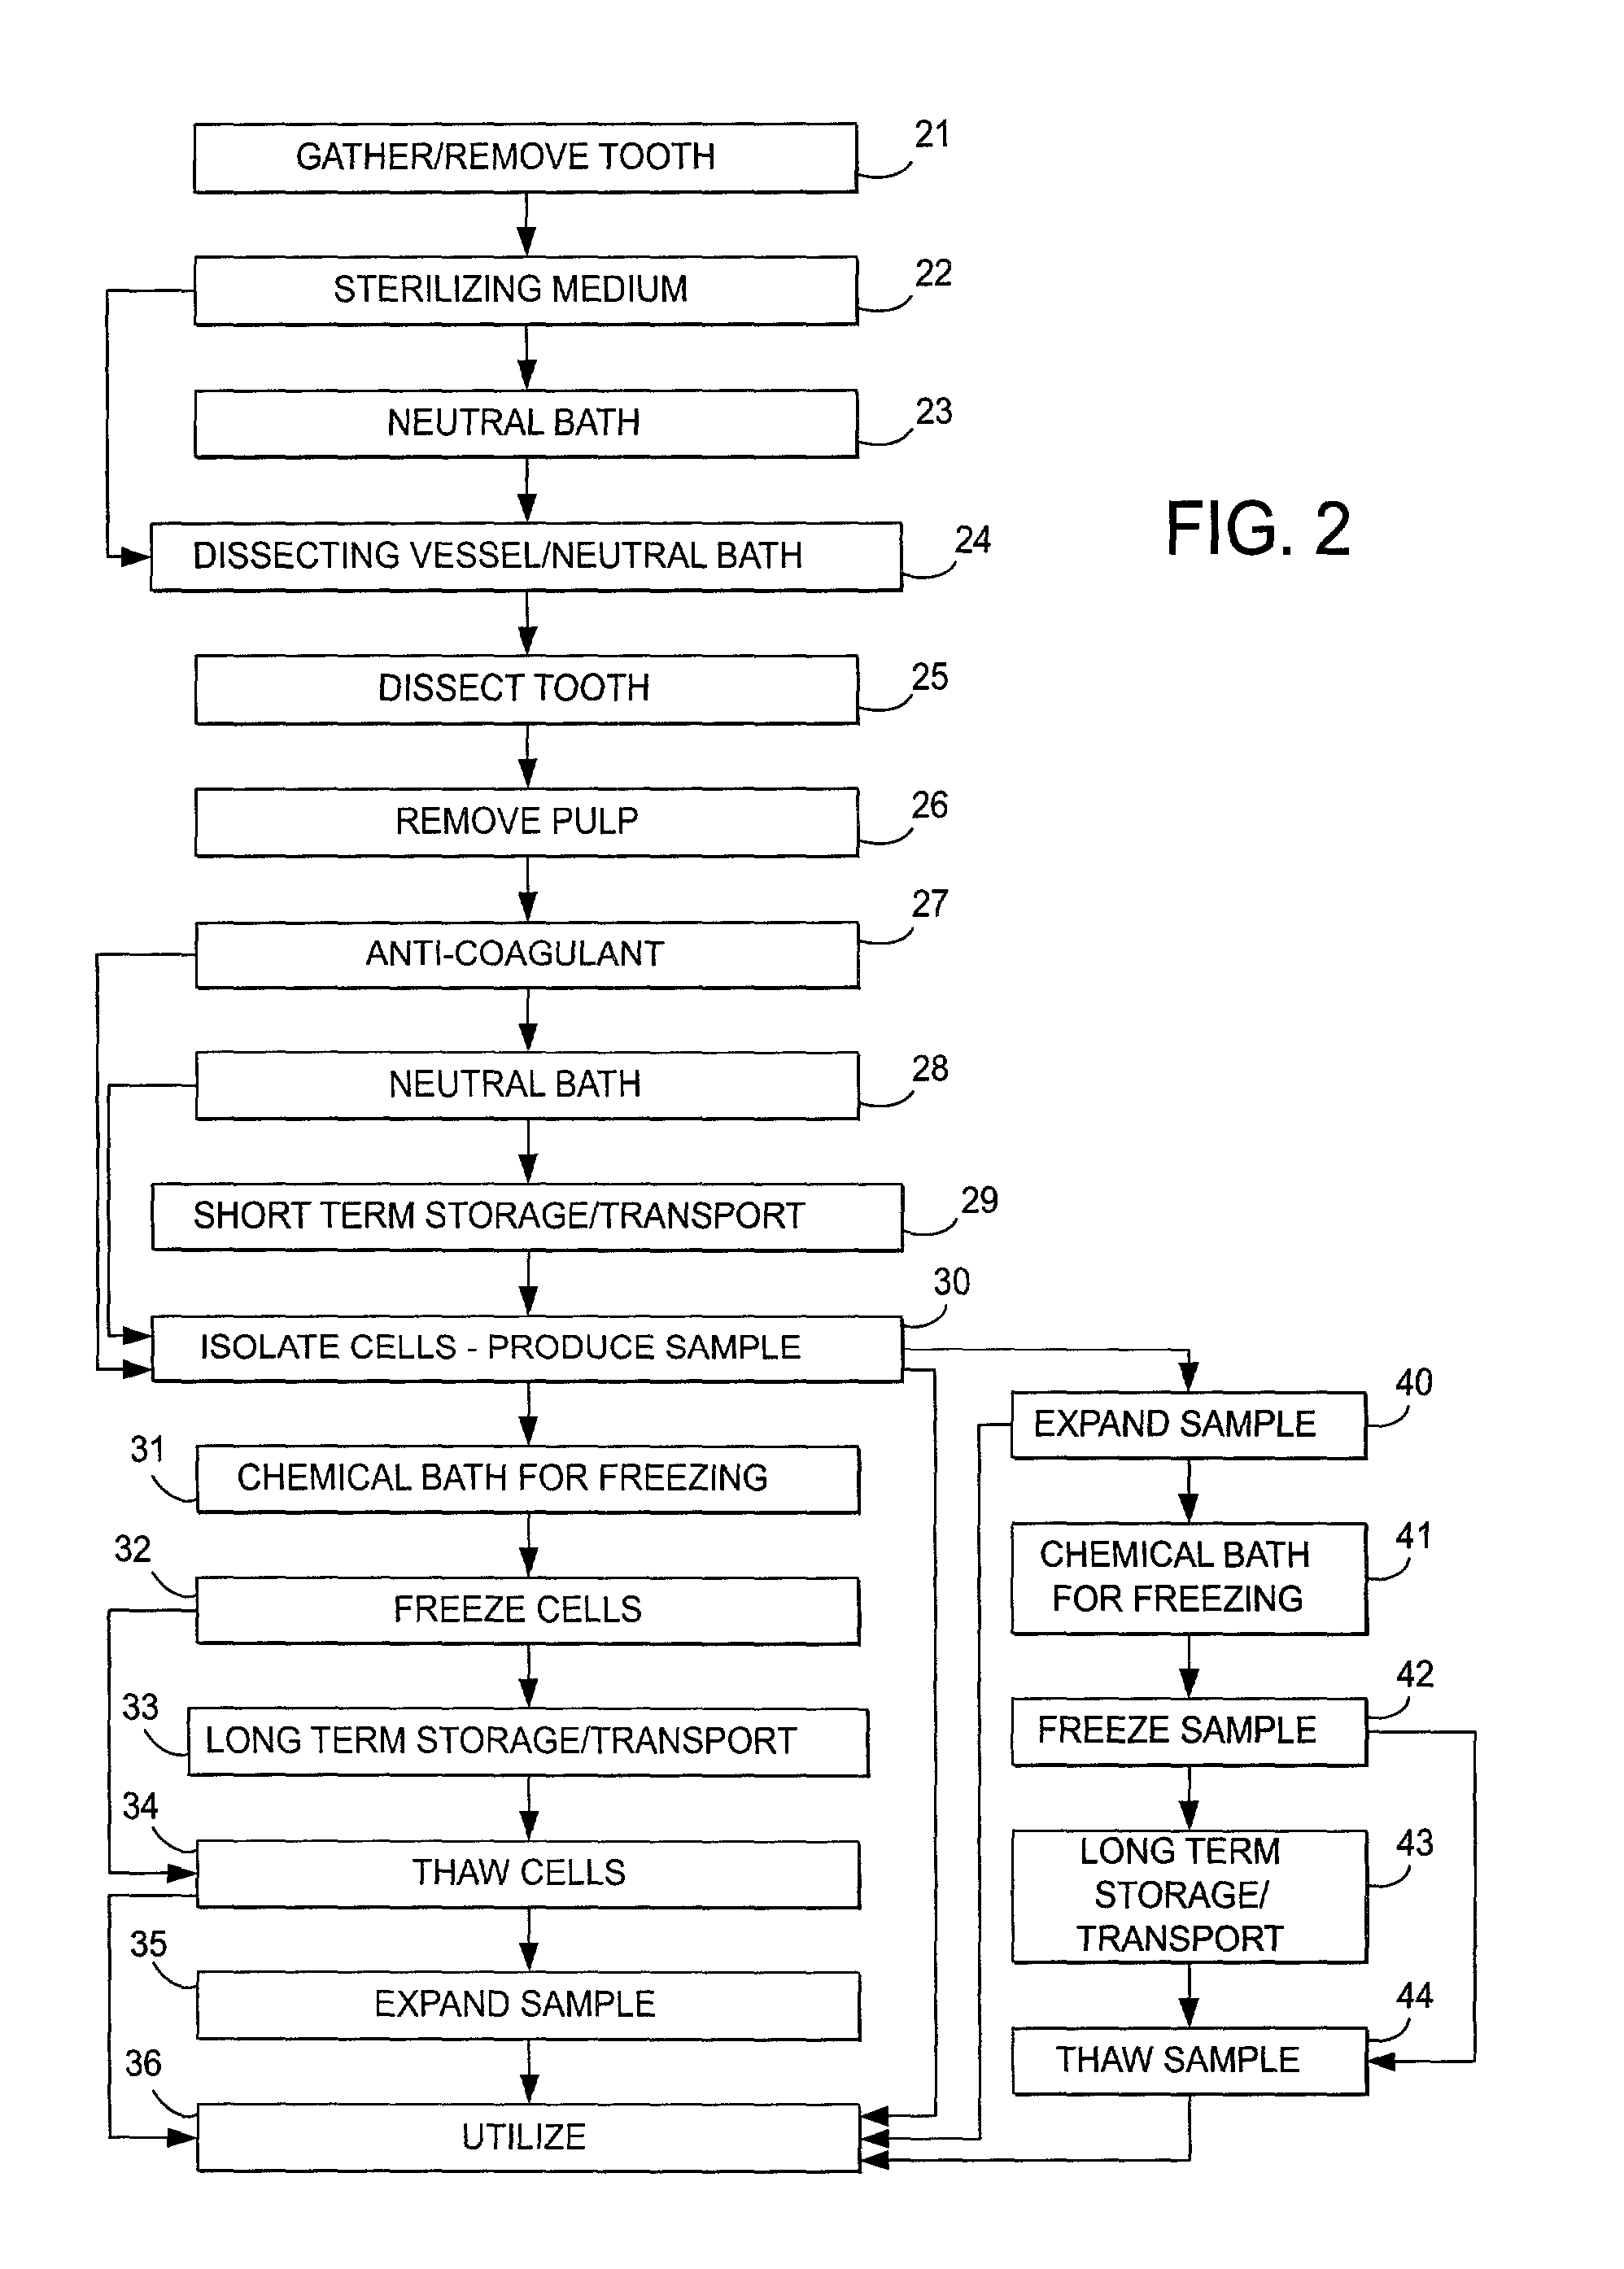 Stem cell and dental pulp harvesting method and apparatus